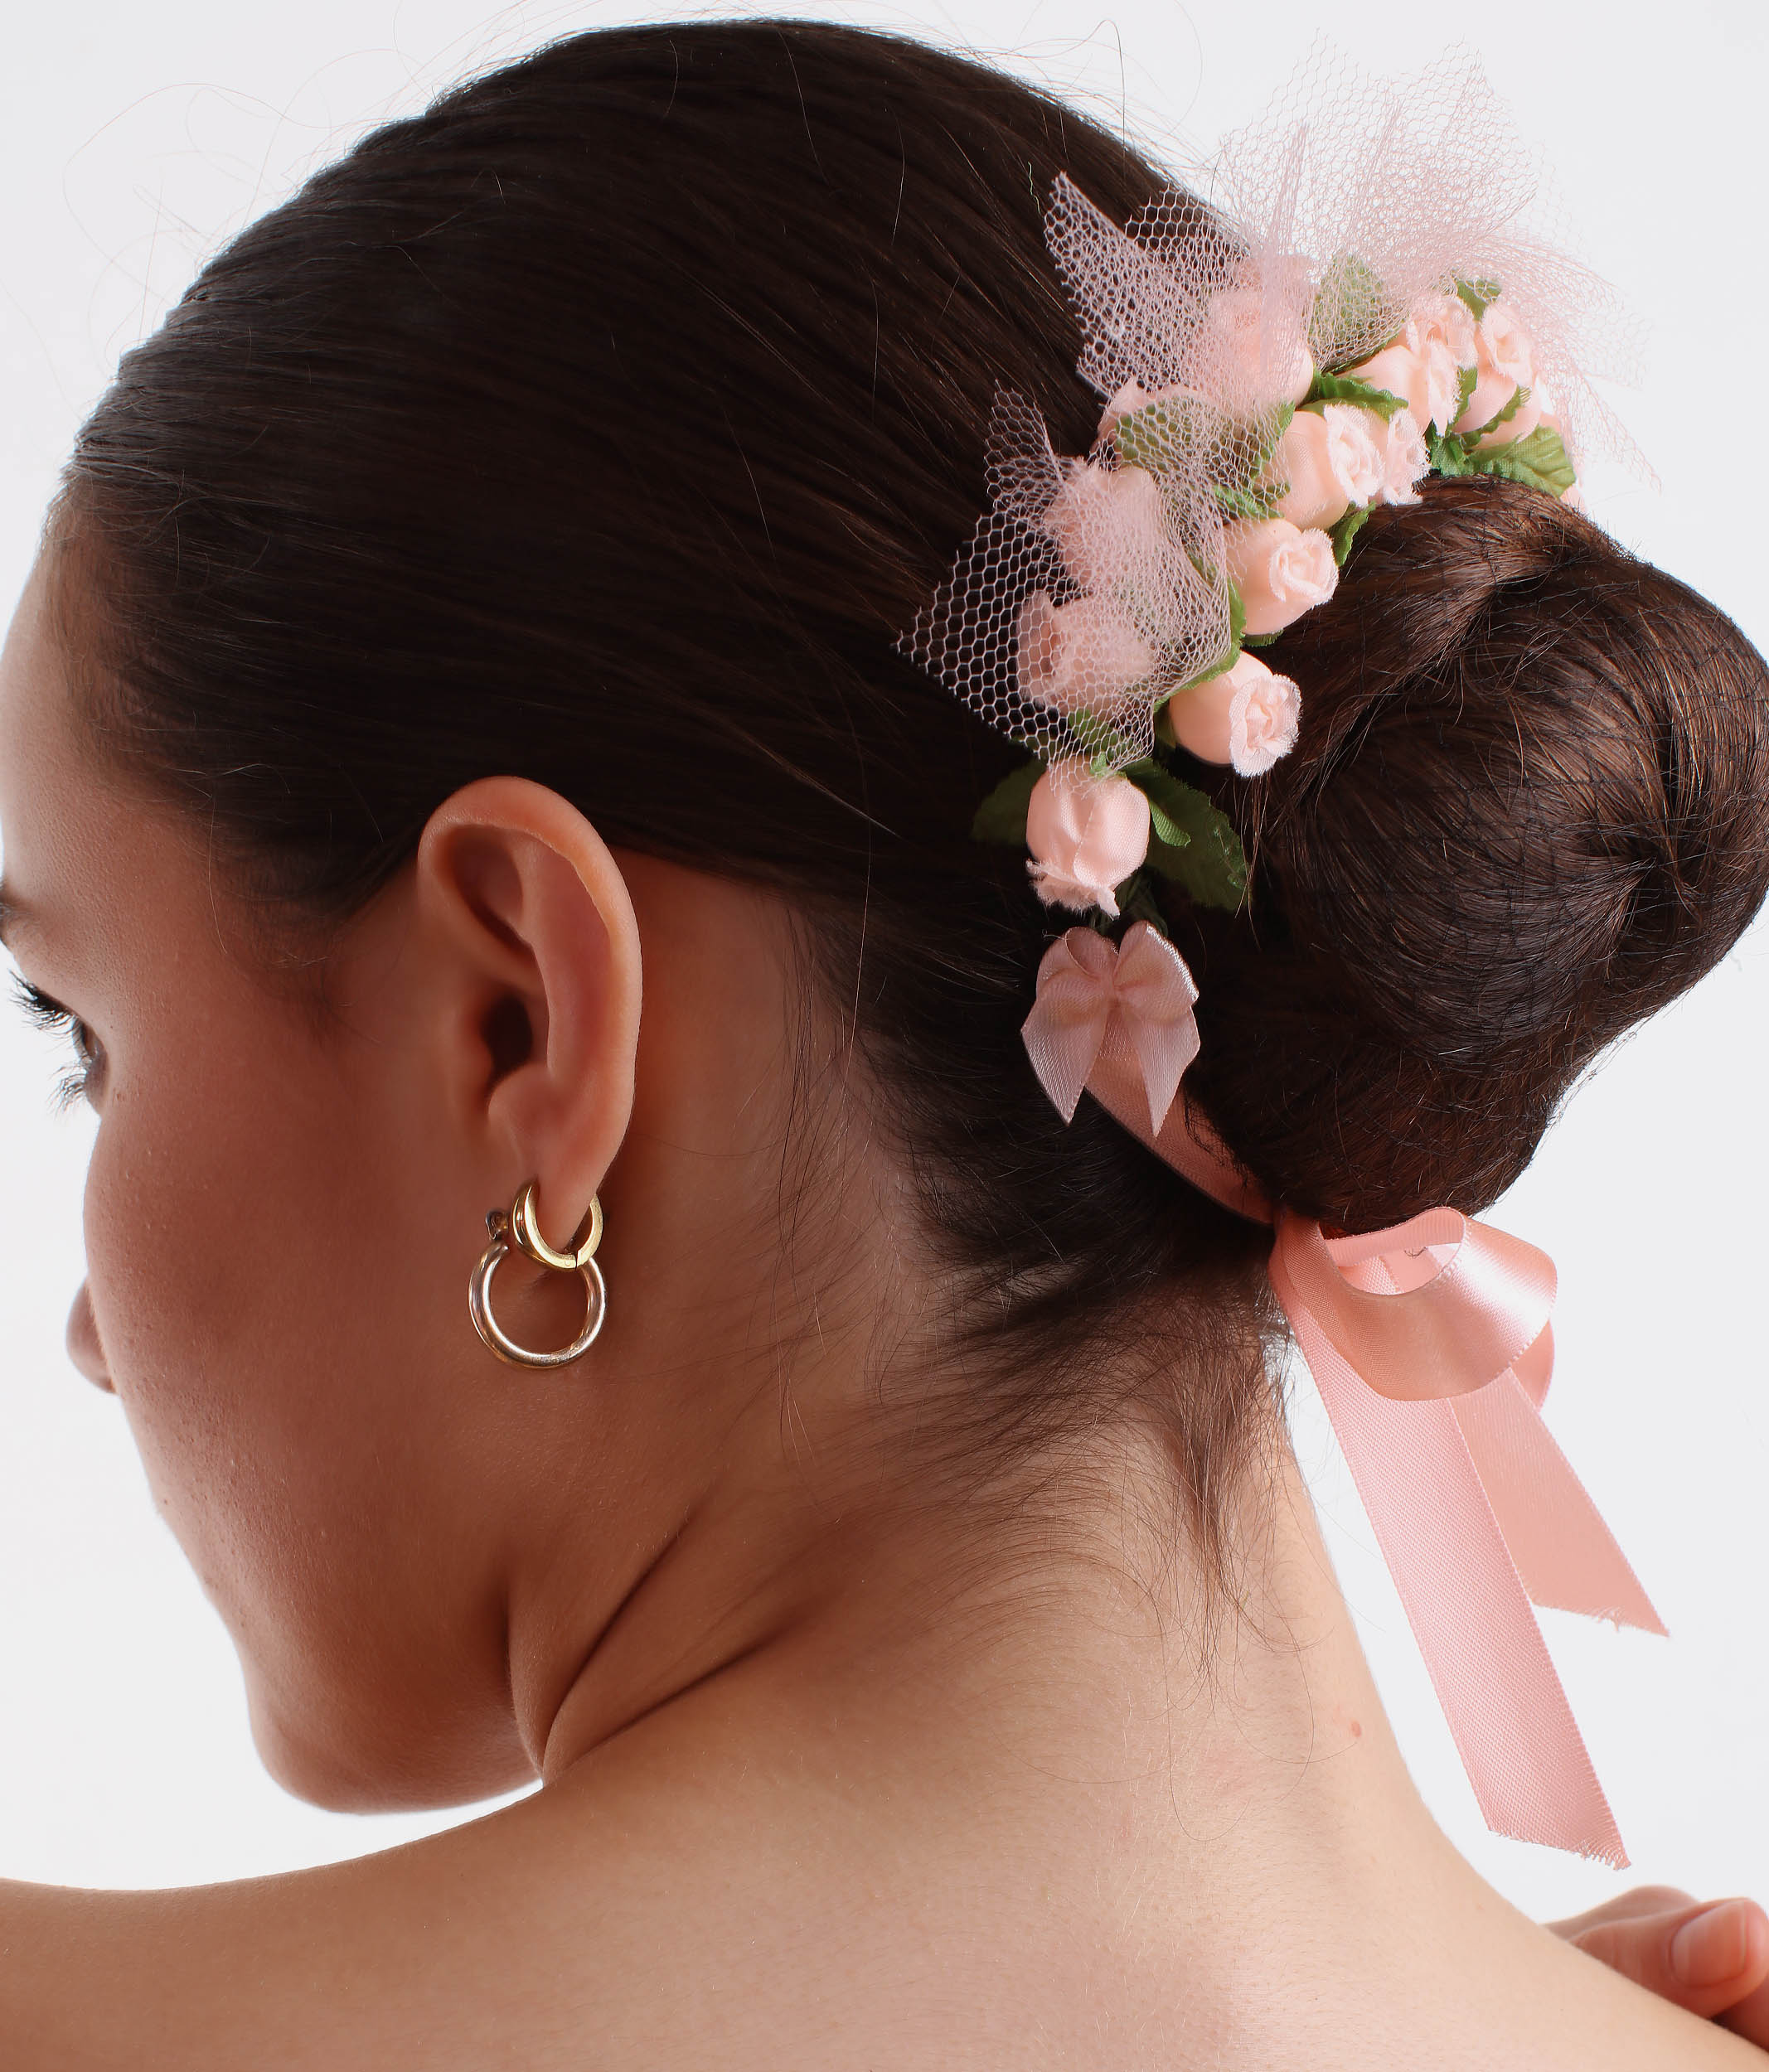 Hair Floral Accessory - 5613